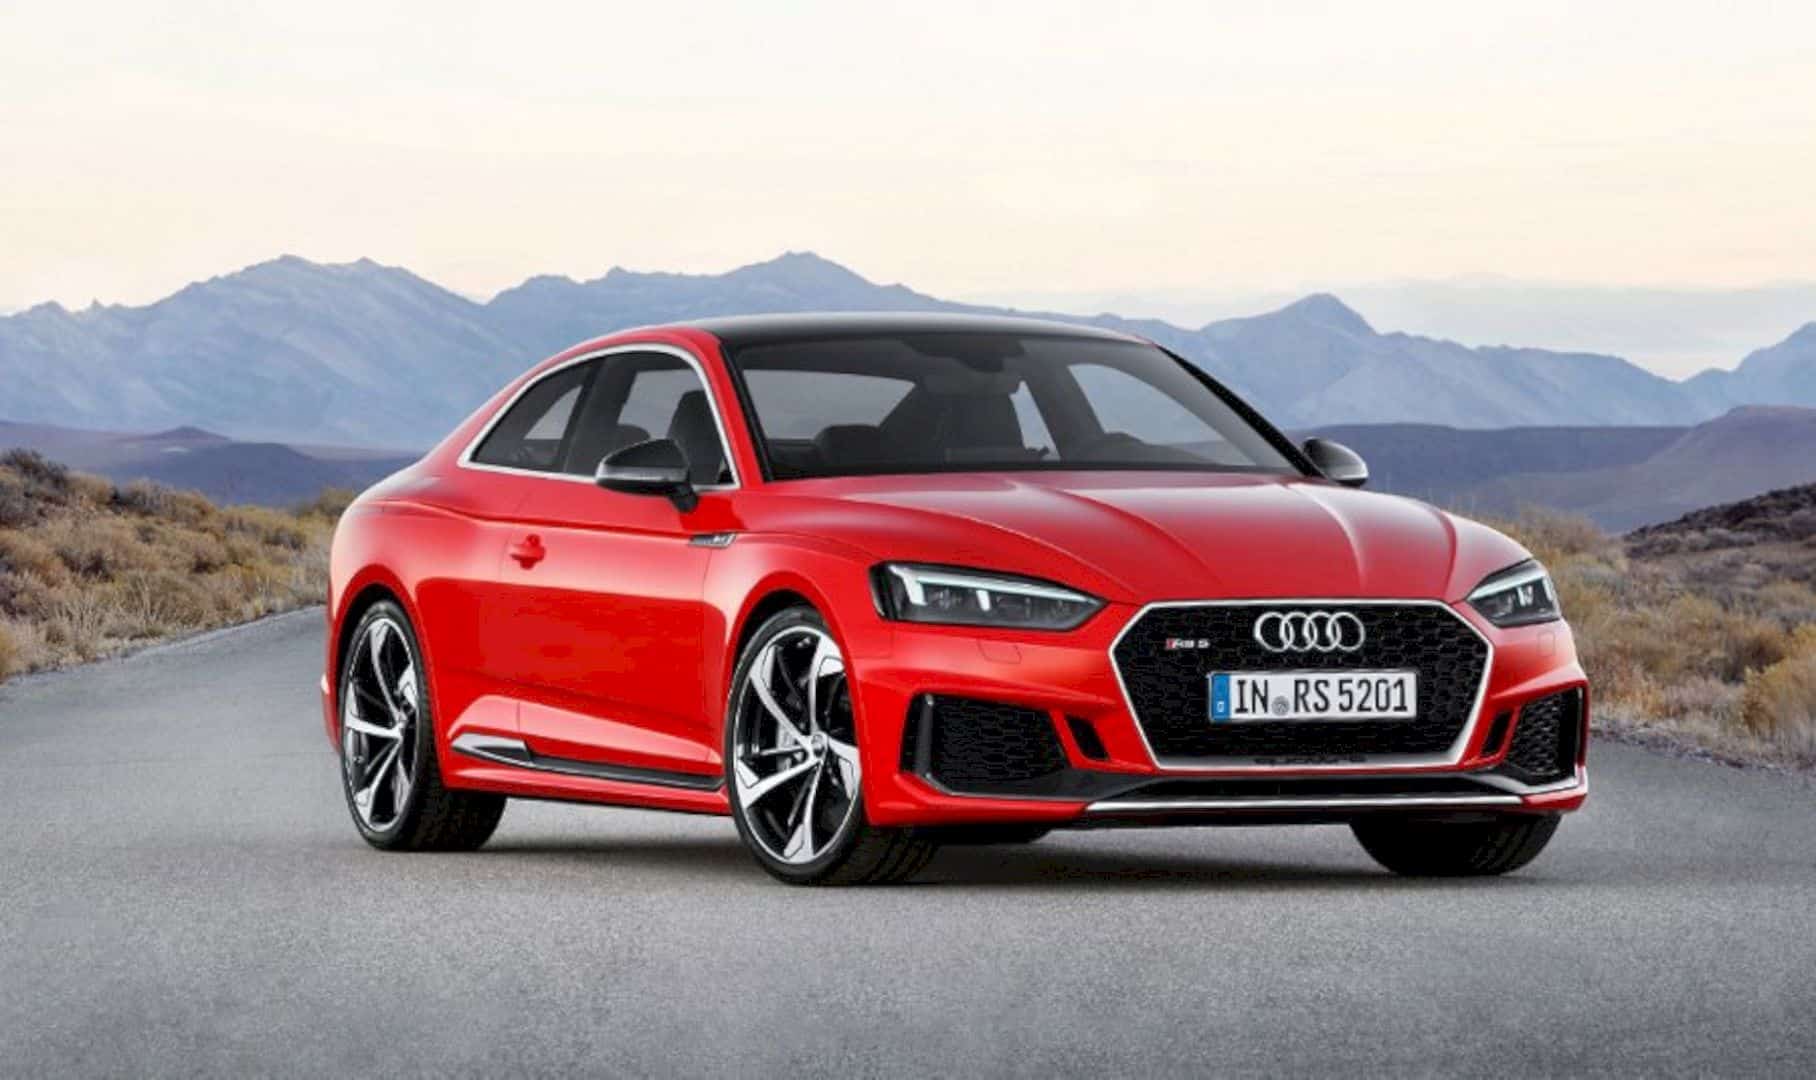 2018 Audi Rs5 Coupe 6